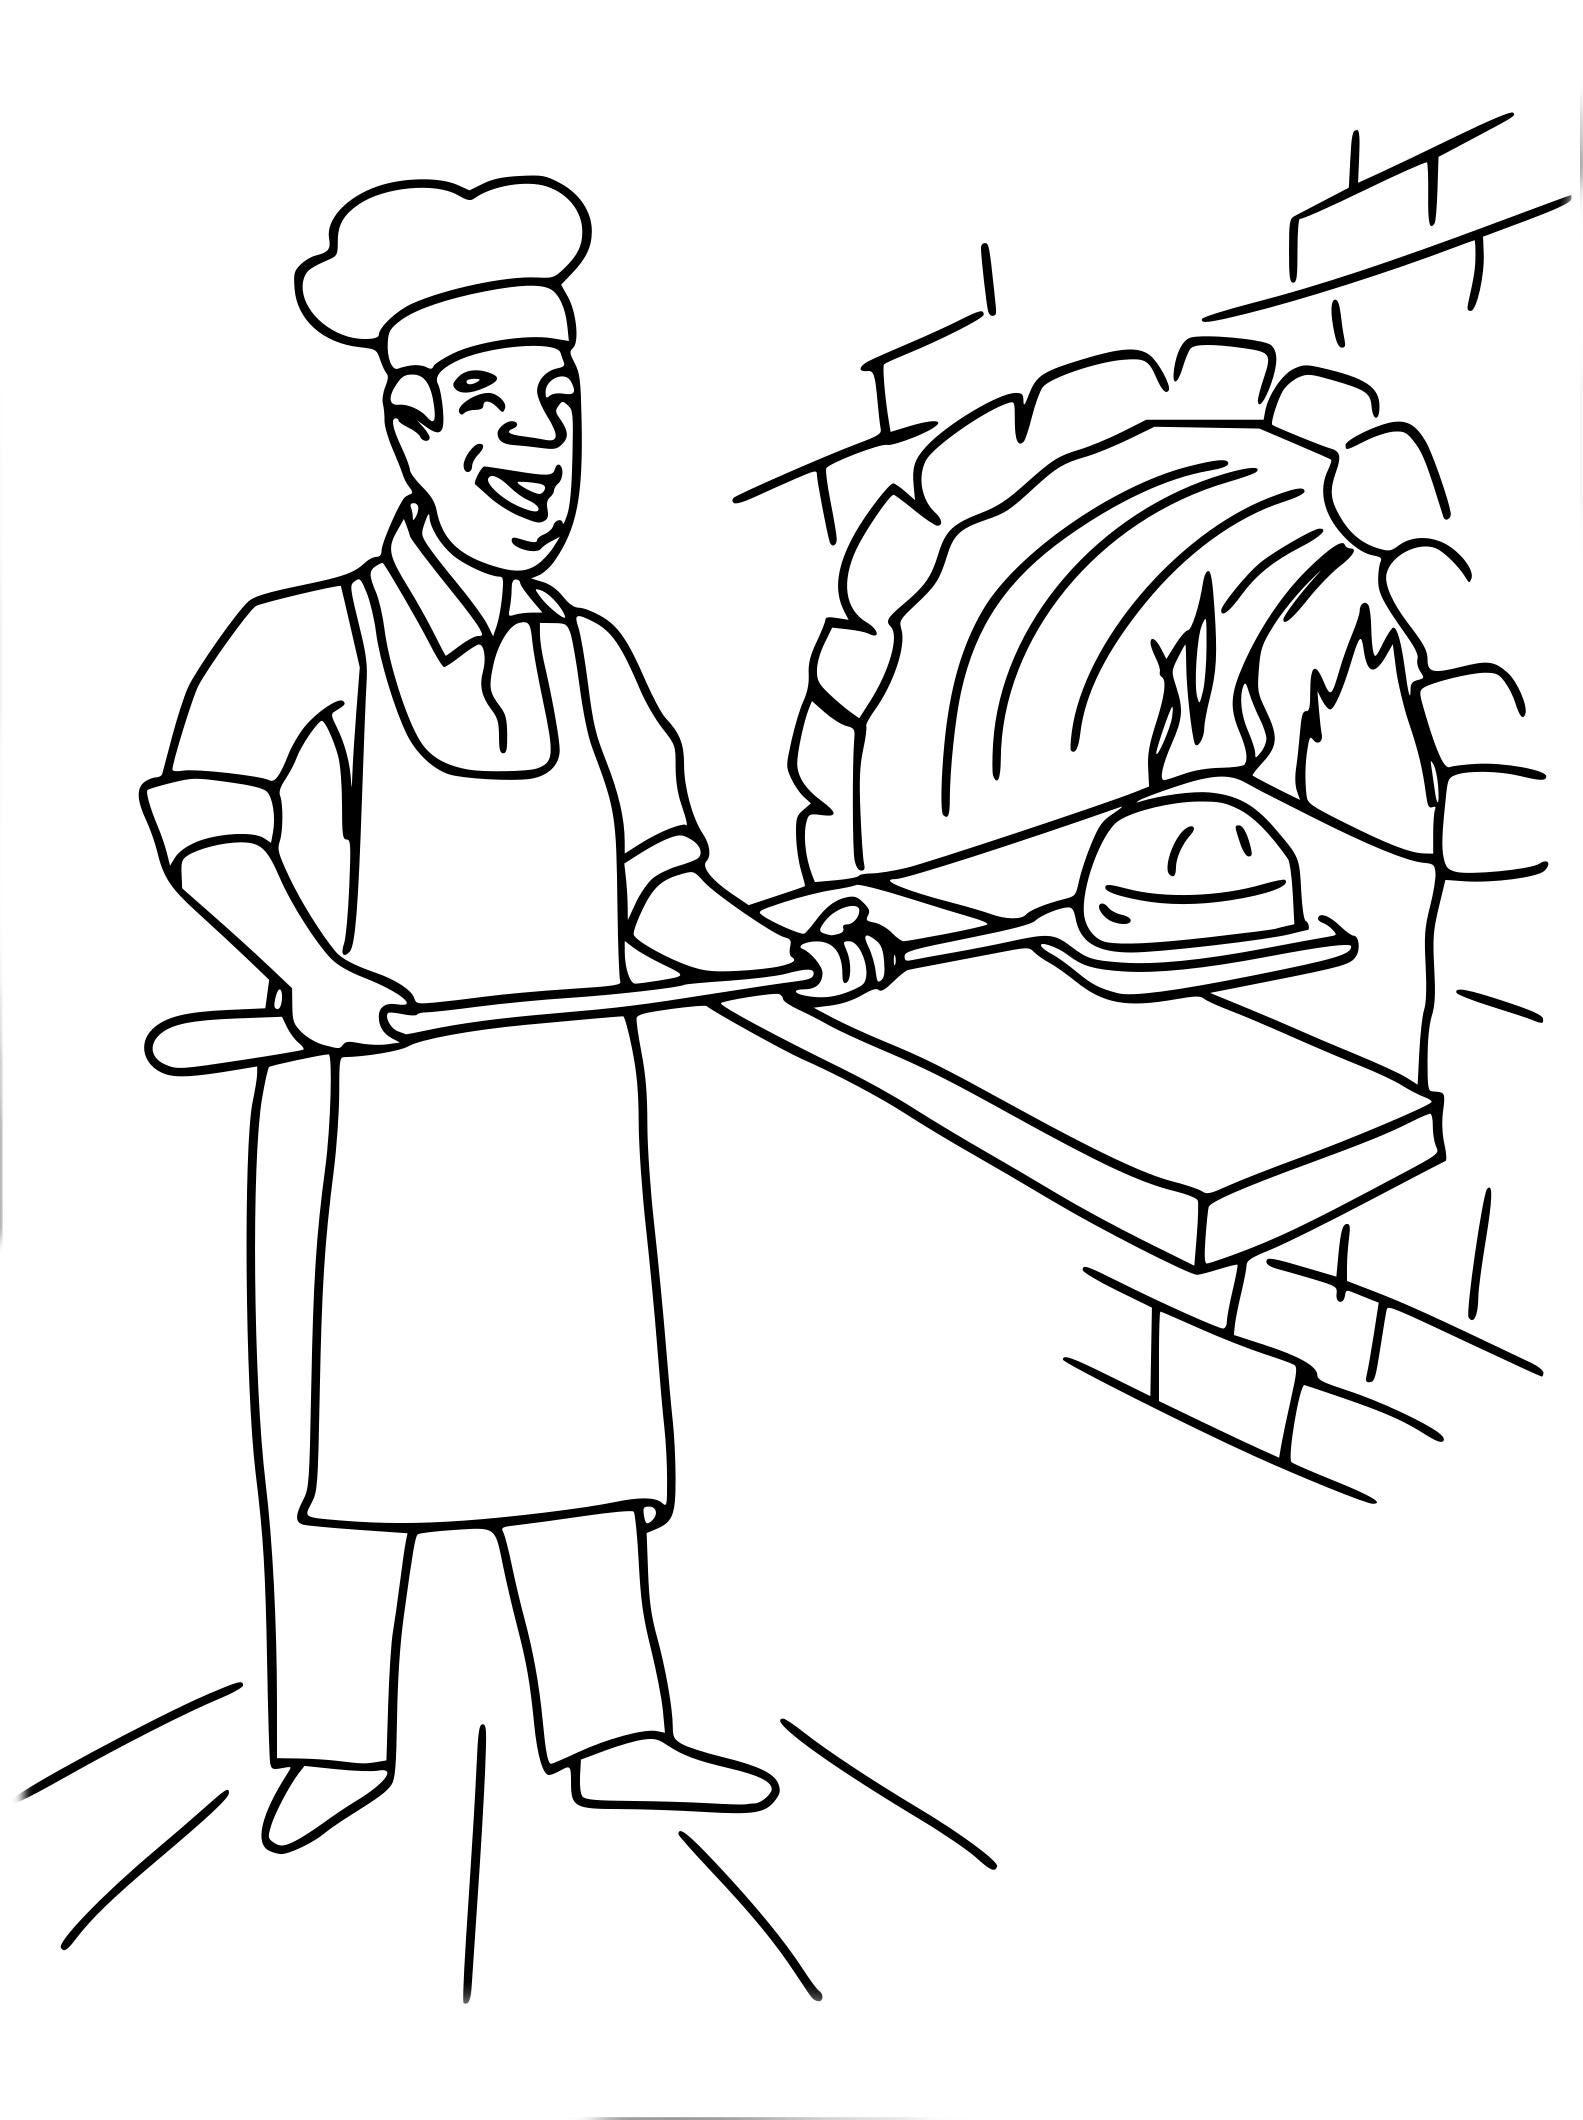 Baker coloring page